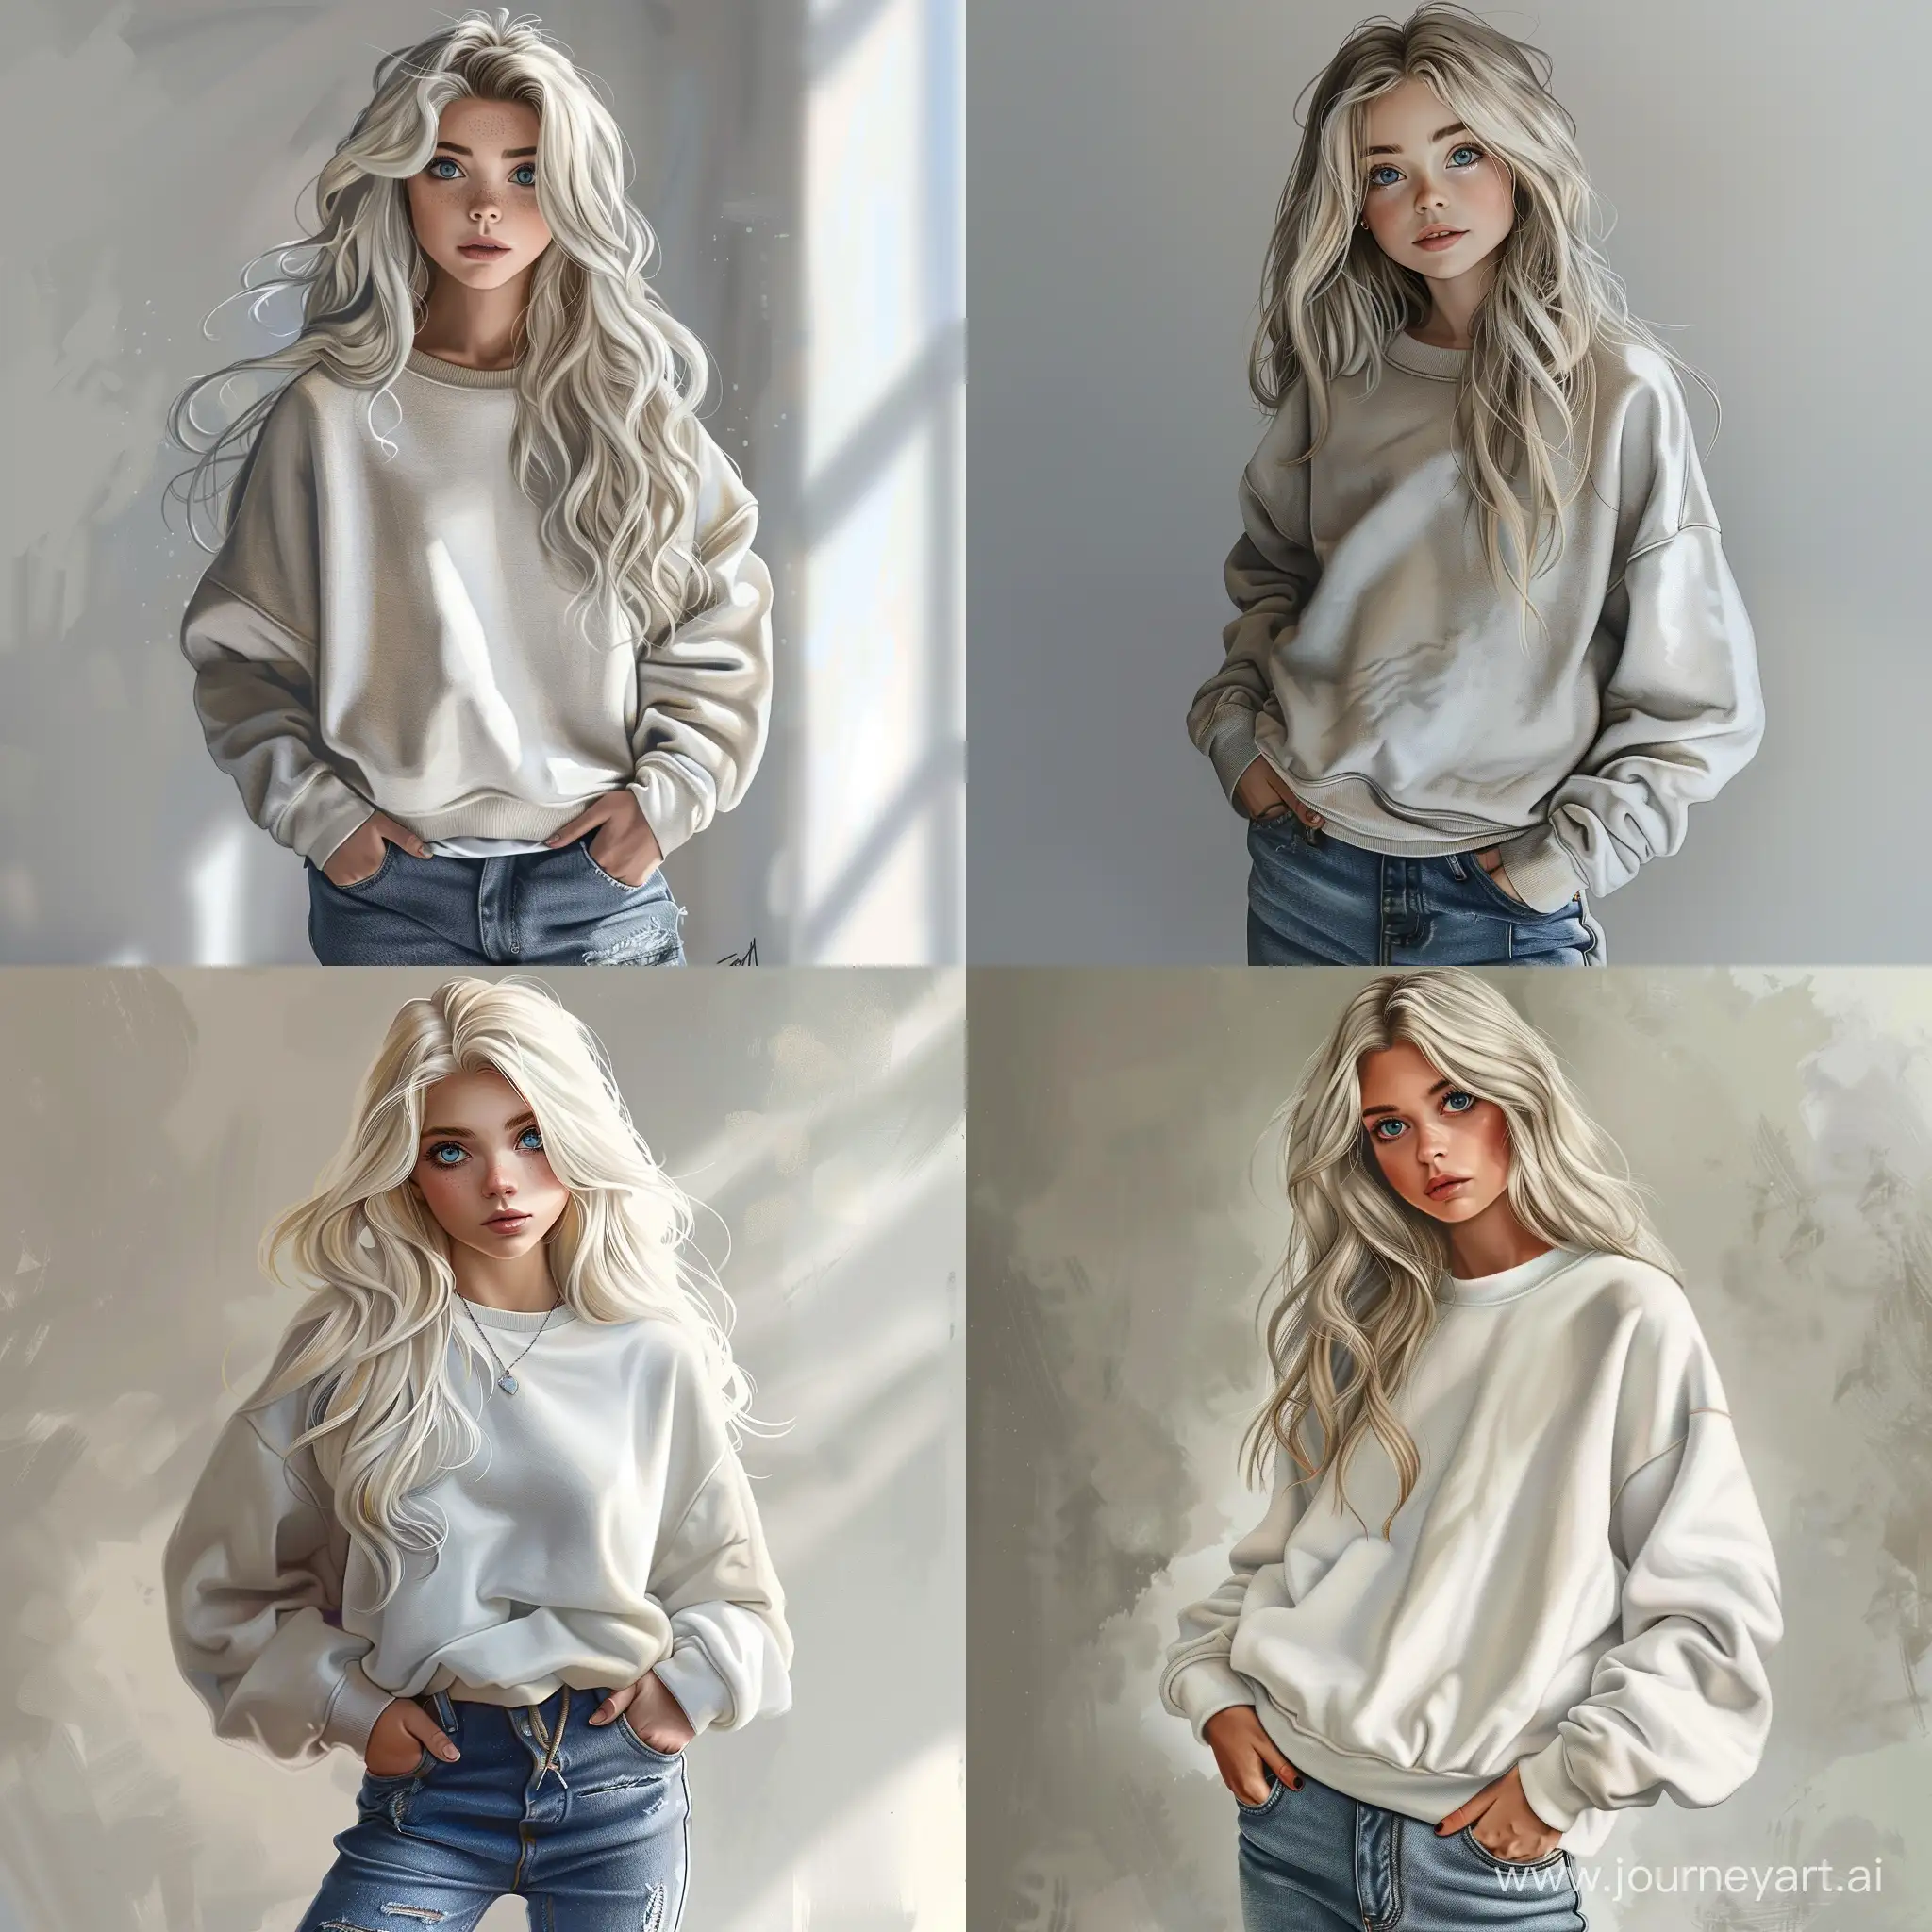 Realistic-Portrait-of-a-Stylish-Teenage-Girl-in-Jeans-and-Oversized-Sweatshirt